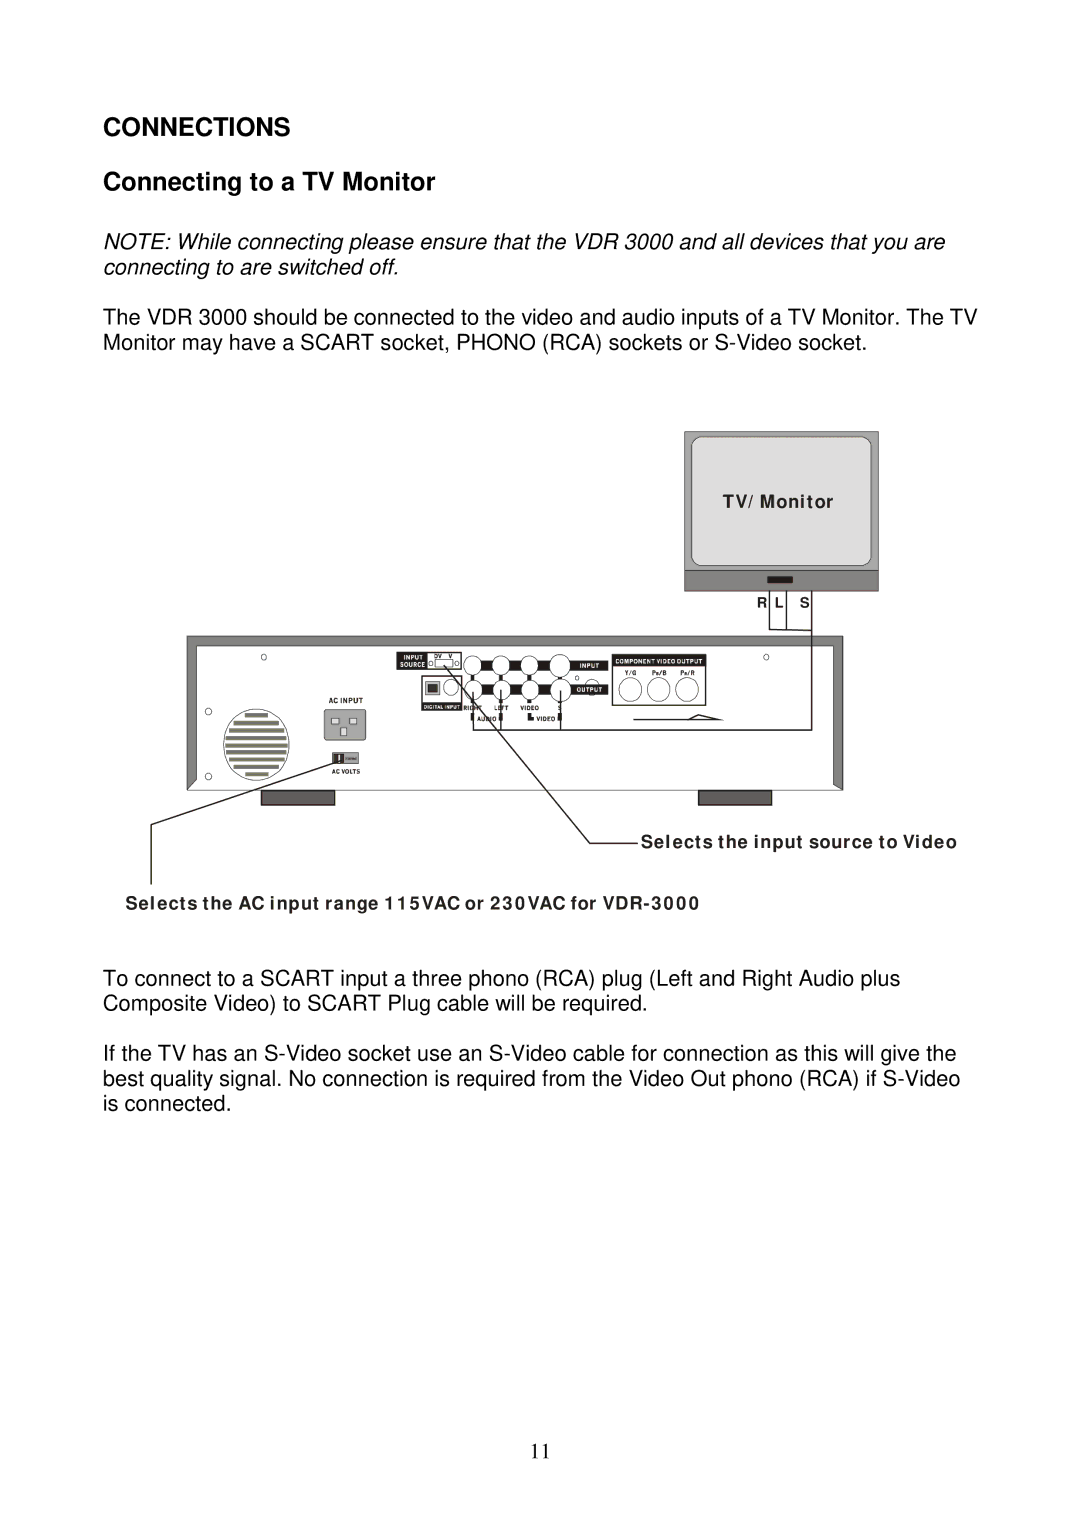 Datavideo VDR-3000 instruction manual Connections, Connecting to a TV Monitor 